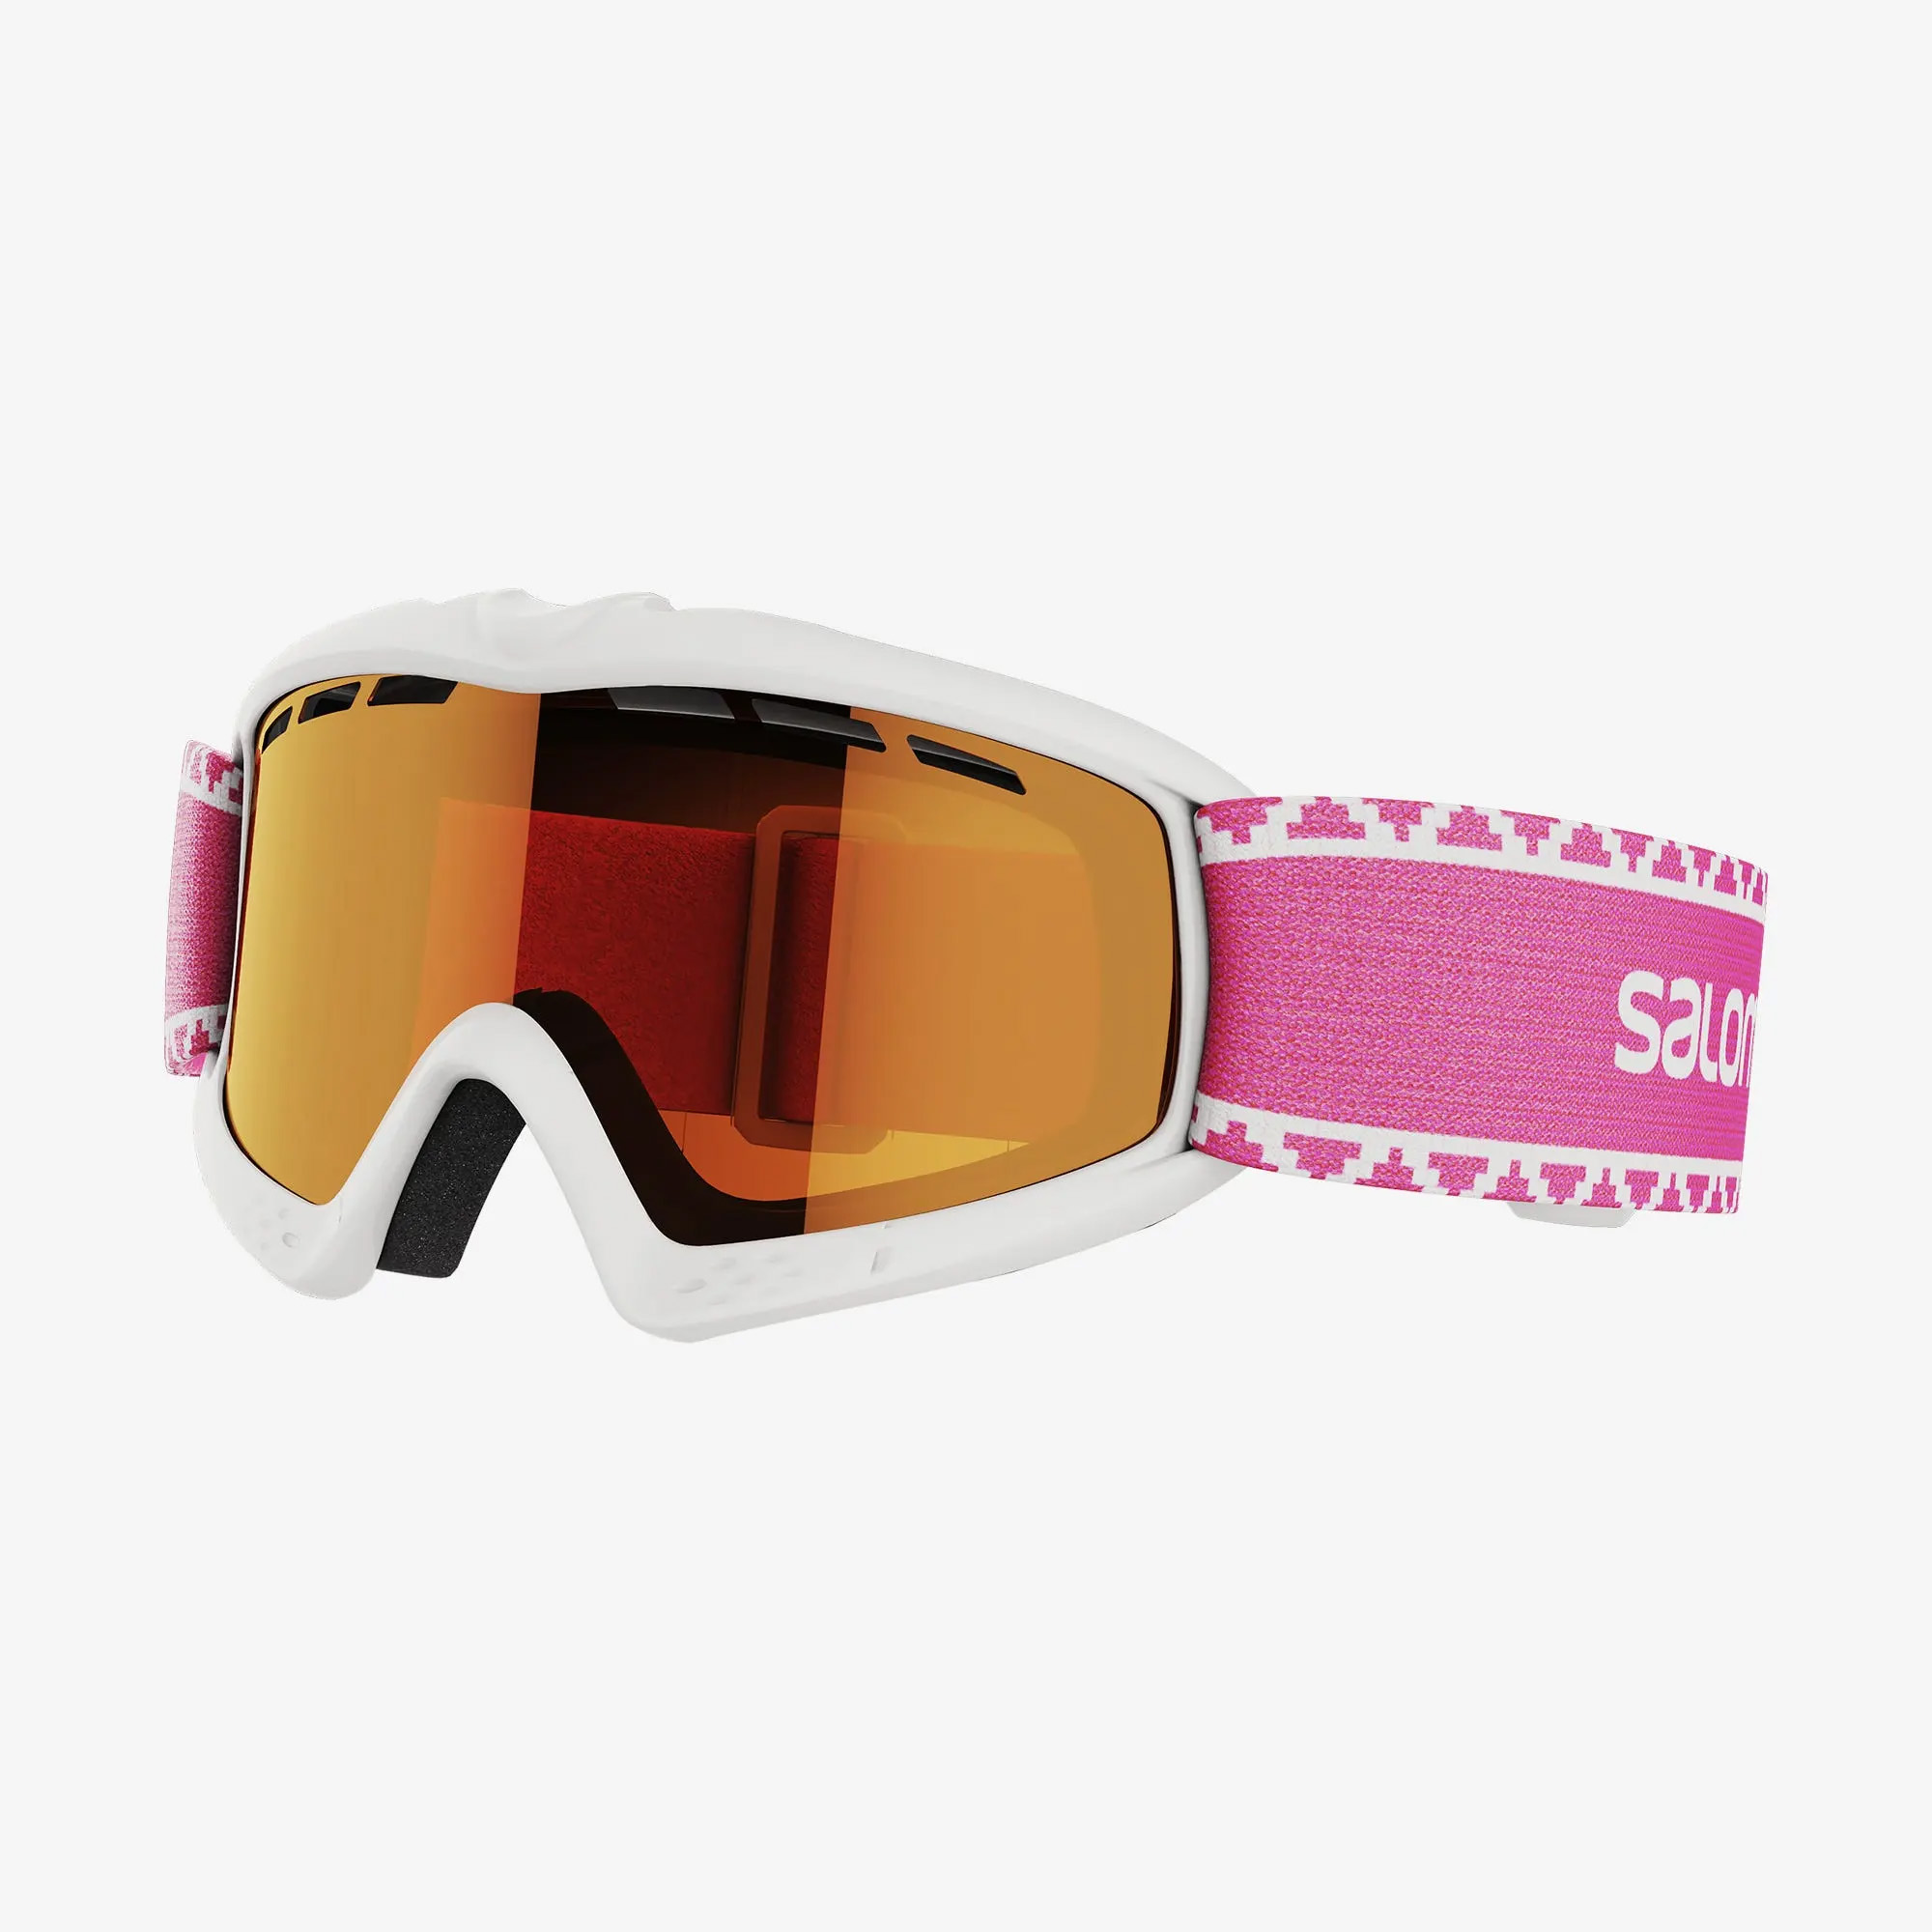 2023 Salomon Childrens Kiwi Ski Goggles 3-6) | Coast Outdoors | Great Deals on Skiing, Snowboarding & Much More